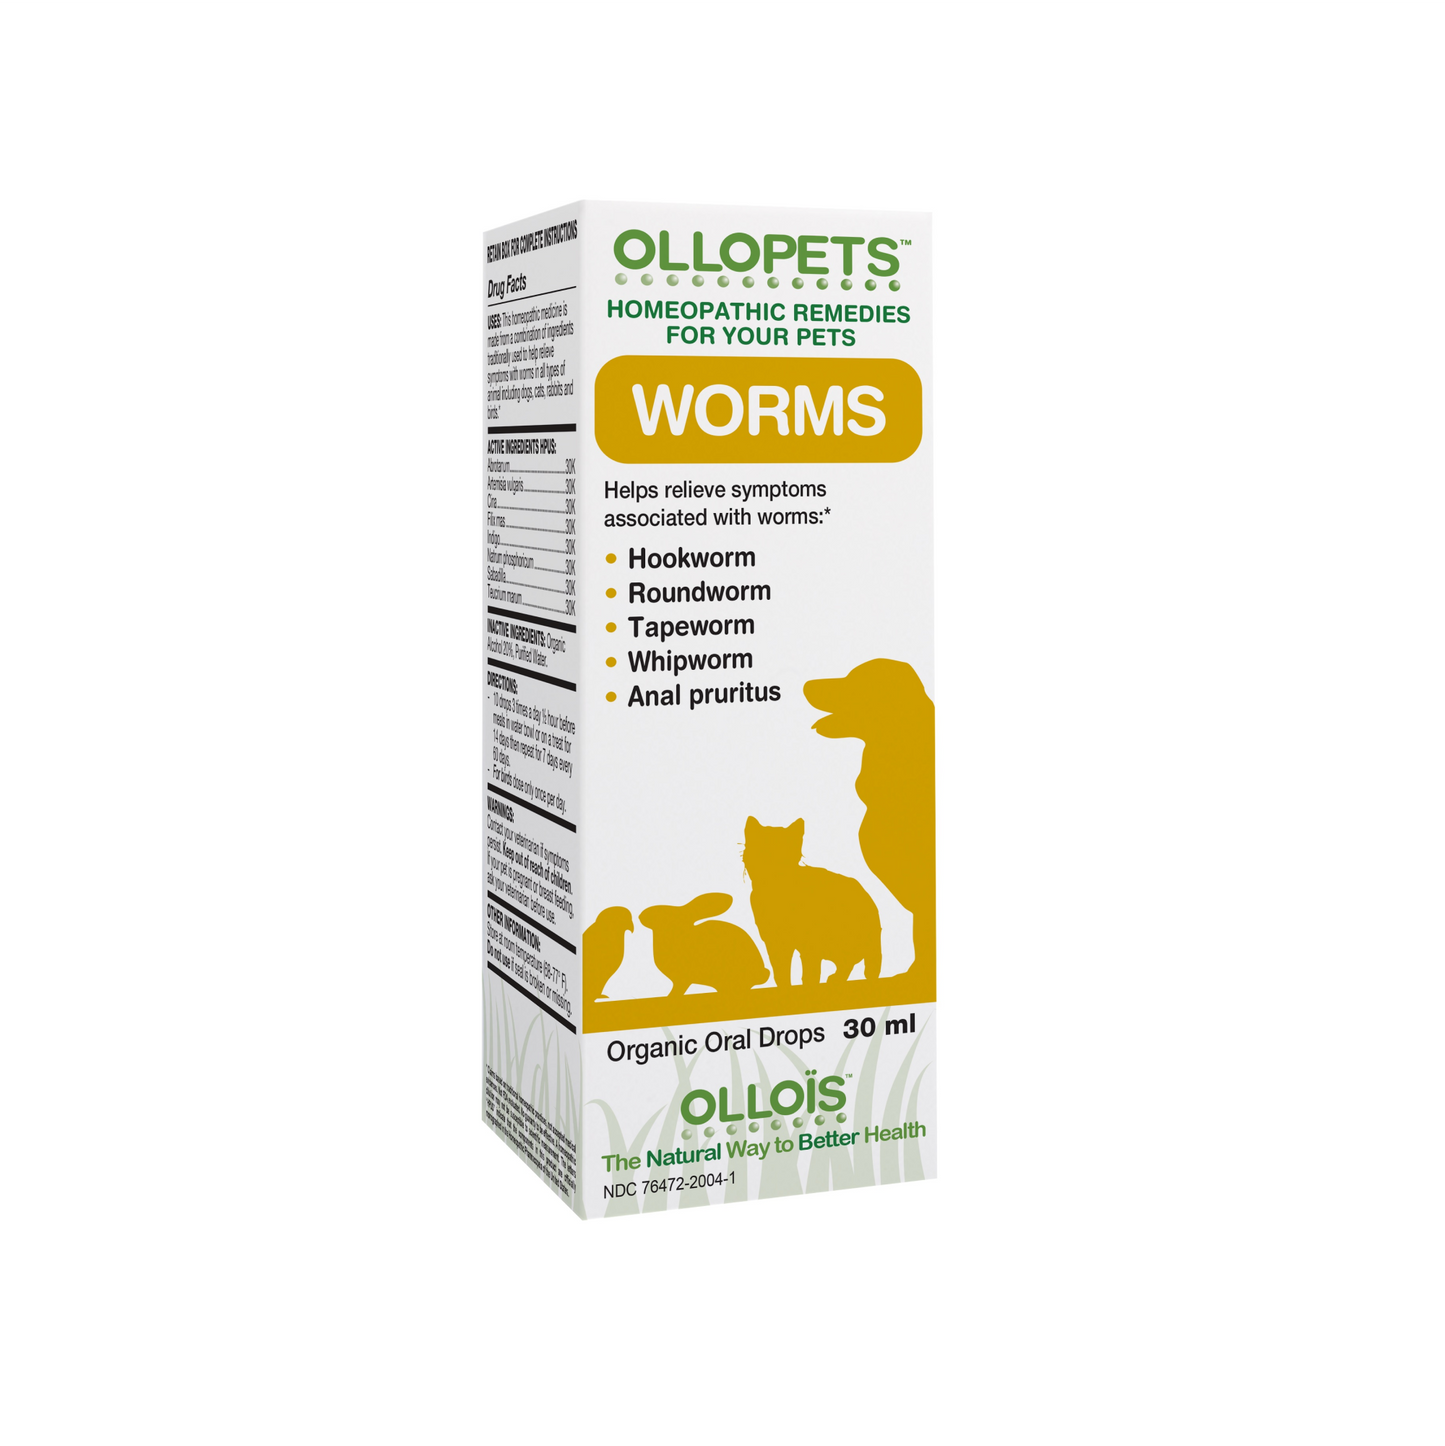 Ollopets Worms